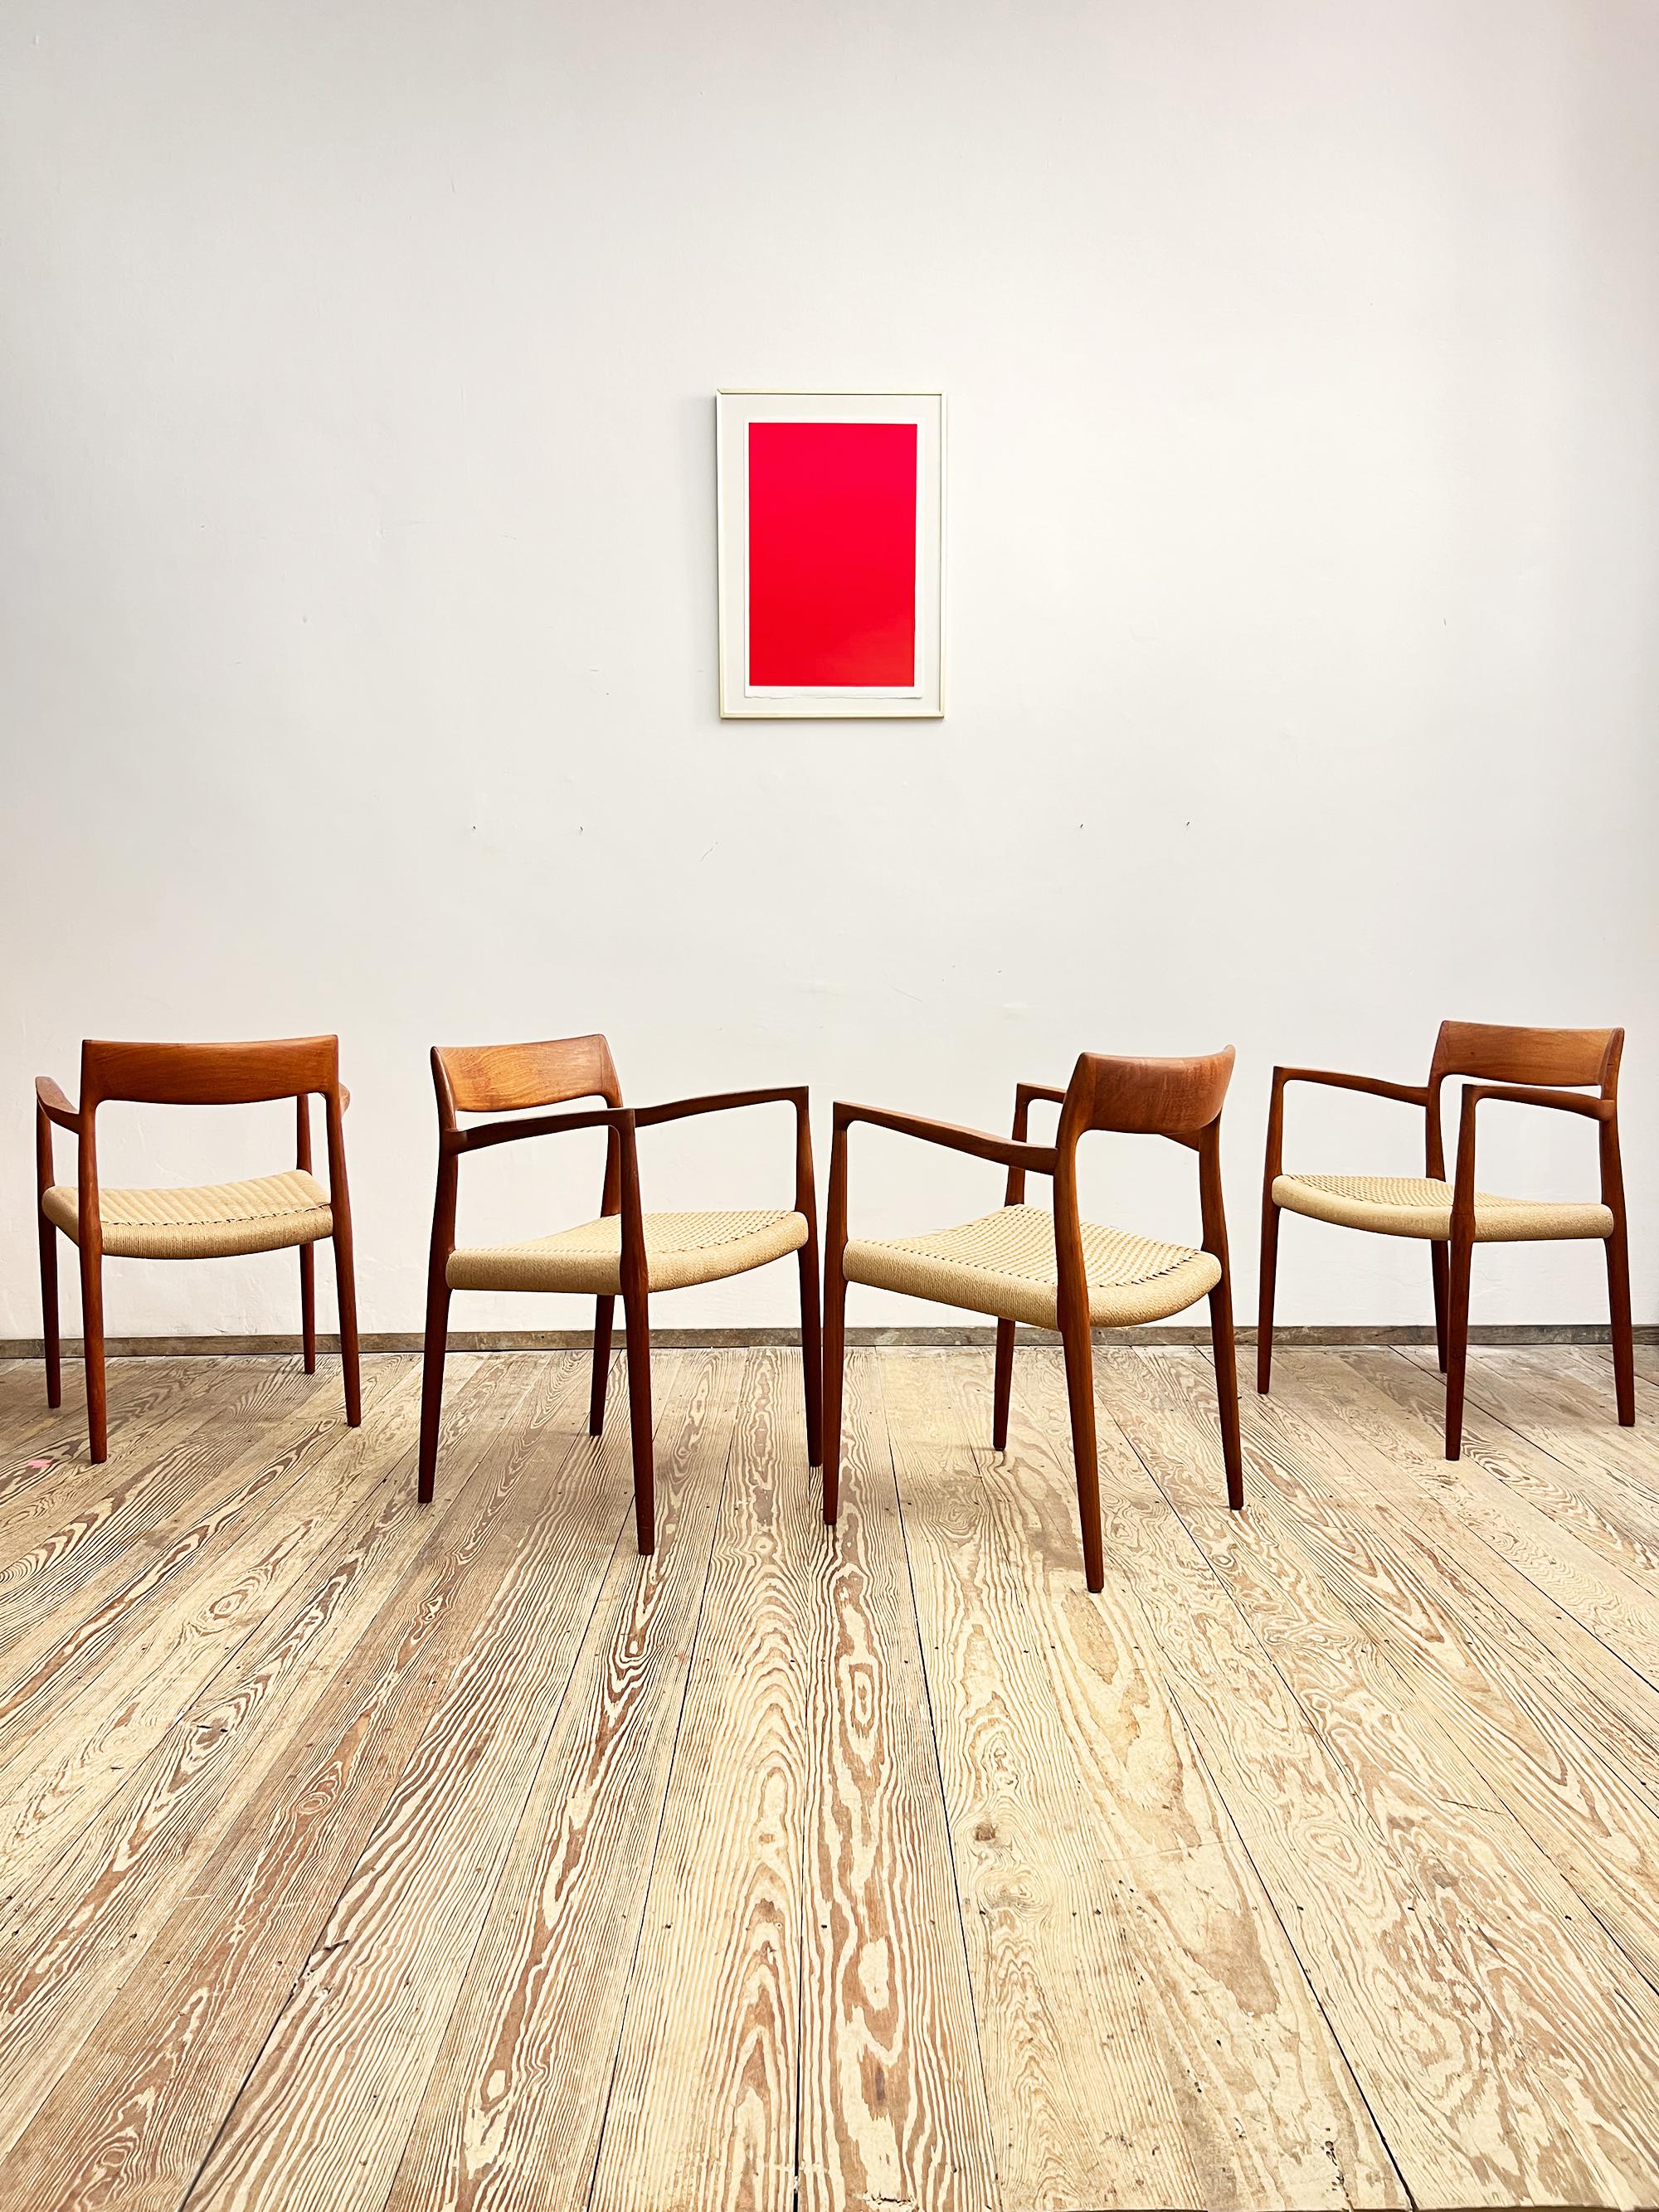 Dimensions: 56x66x80x44cm (Width x Depth x Height x Seat height)

This beautiful set of Danish dining chairs designed by Niels O. Møller in the 1950s was manufactured by J.L. Møllers in Denmark. The set features 4 armrest chairs of Niels O.